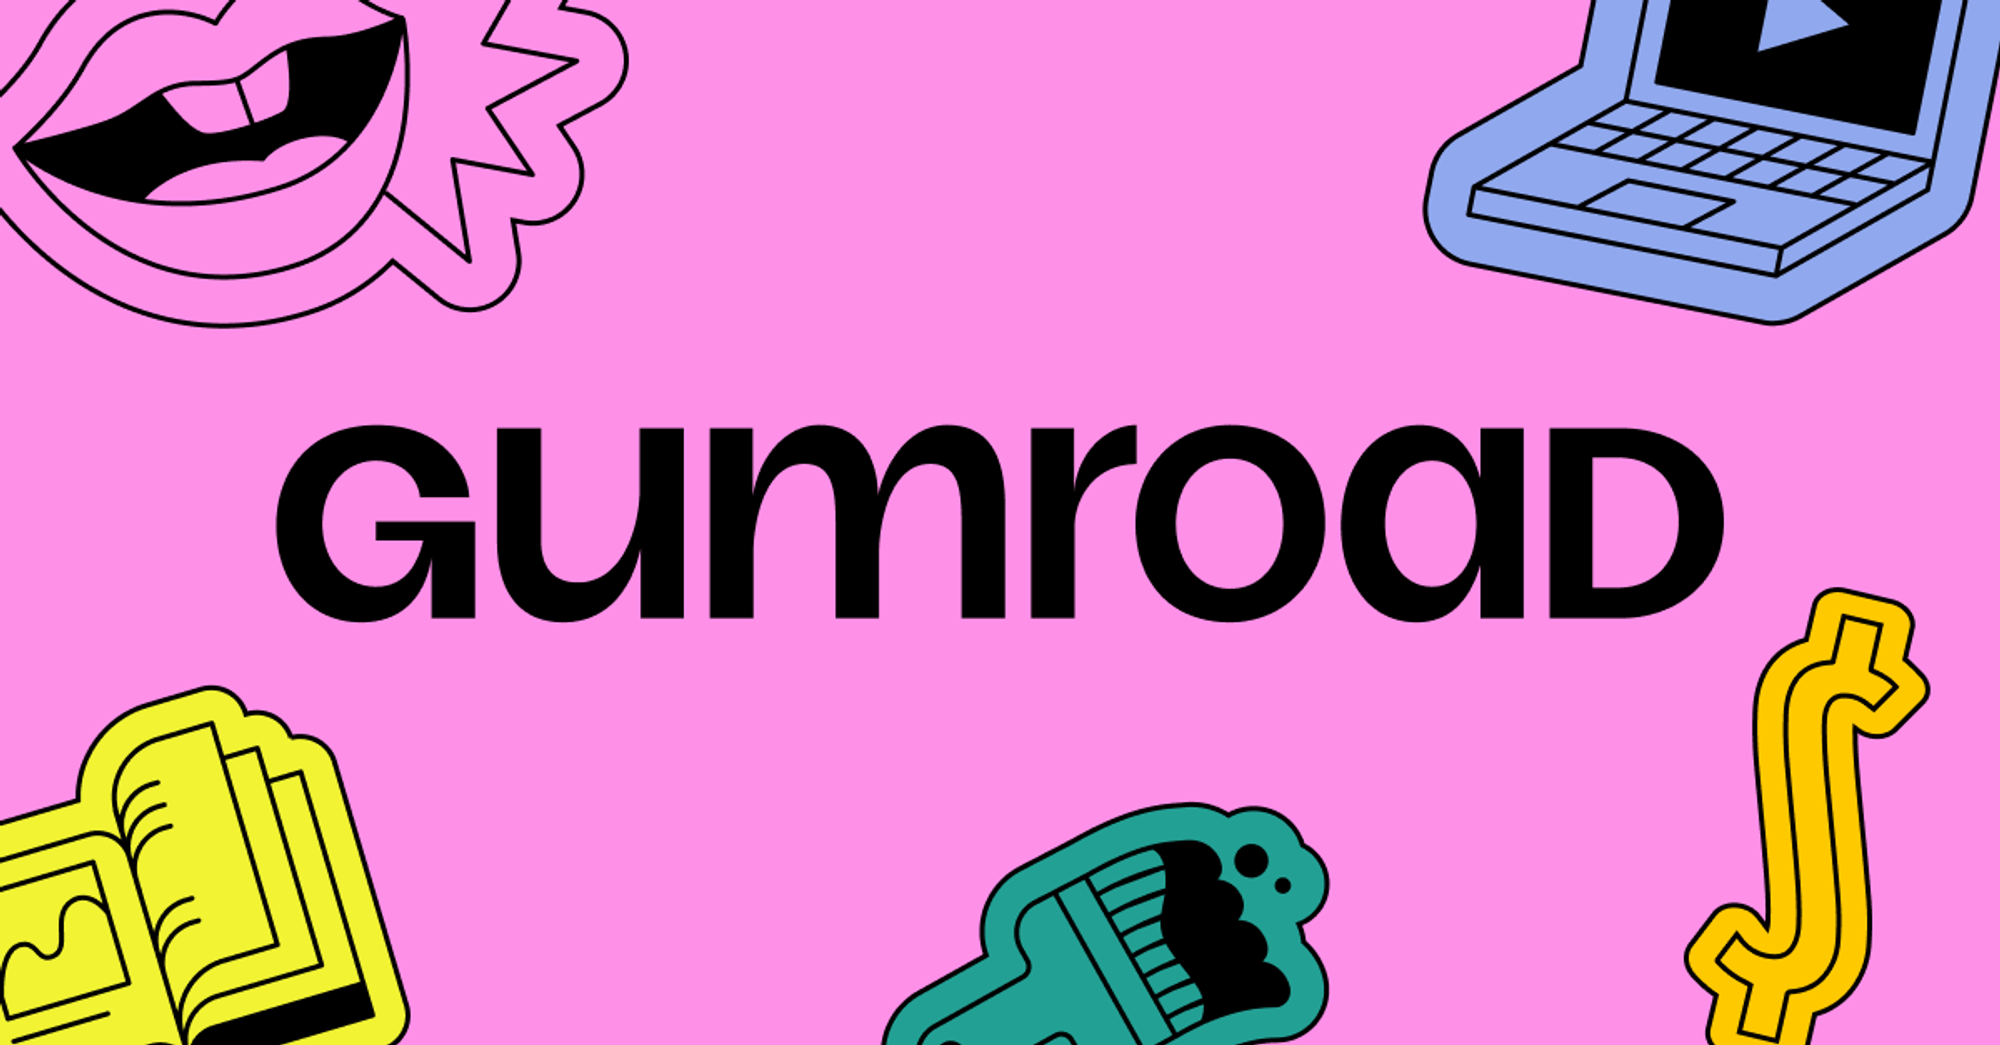 Gumroad – Sell what you know and see what sticks